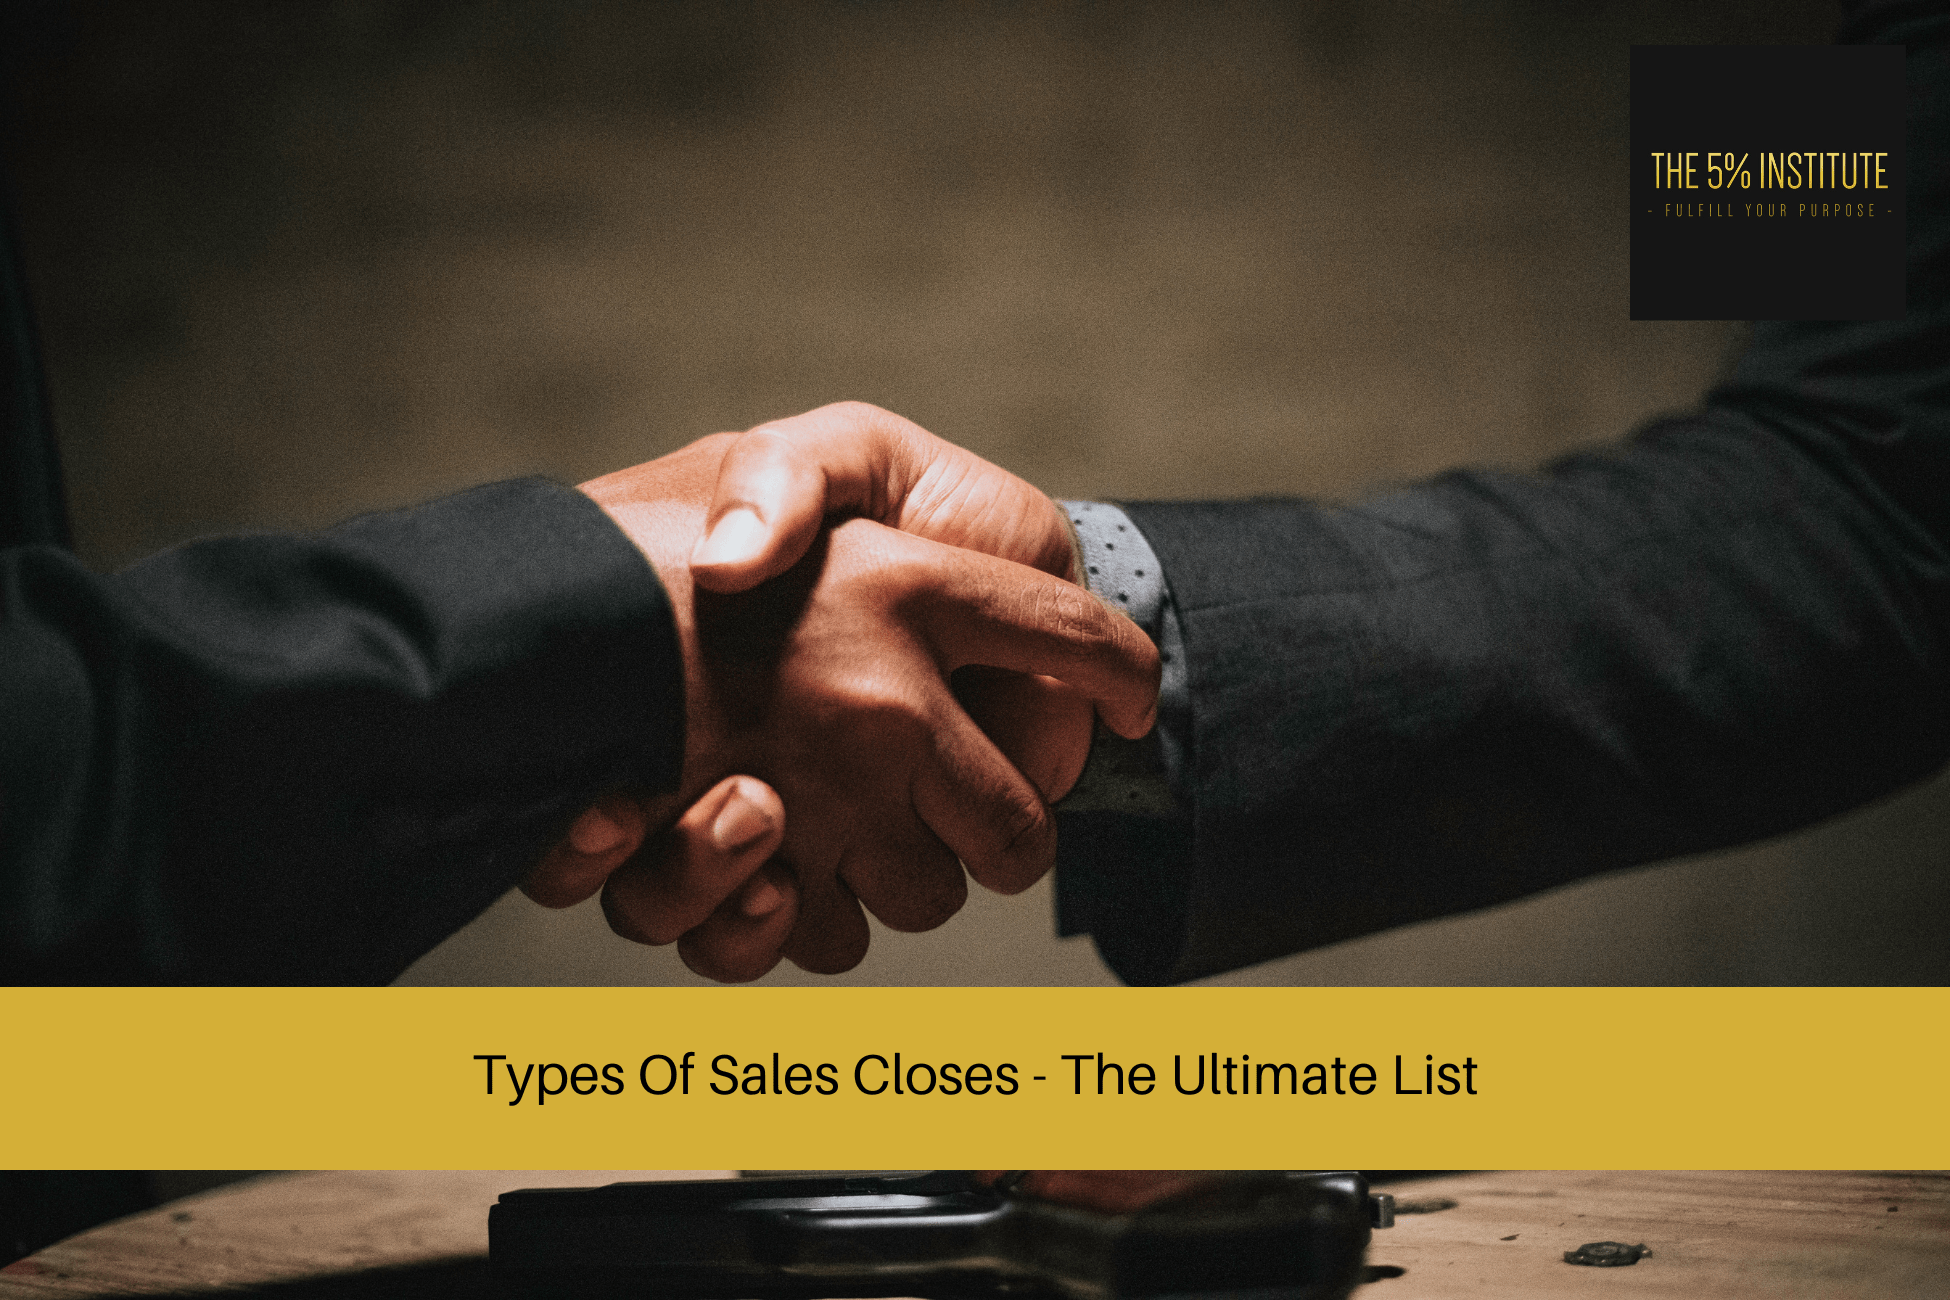 Types Of Sales Closes - The Ultimate List